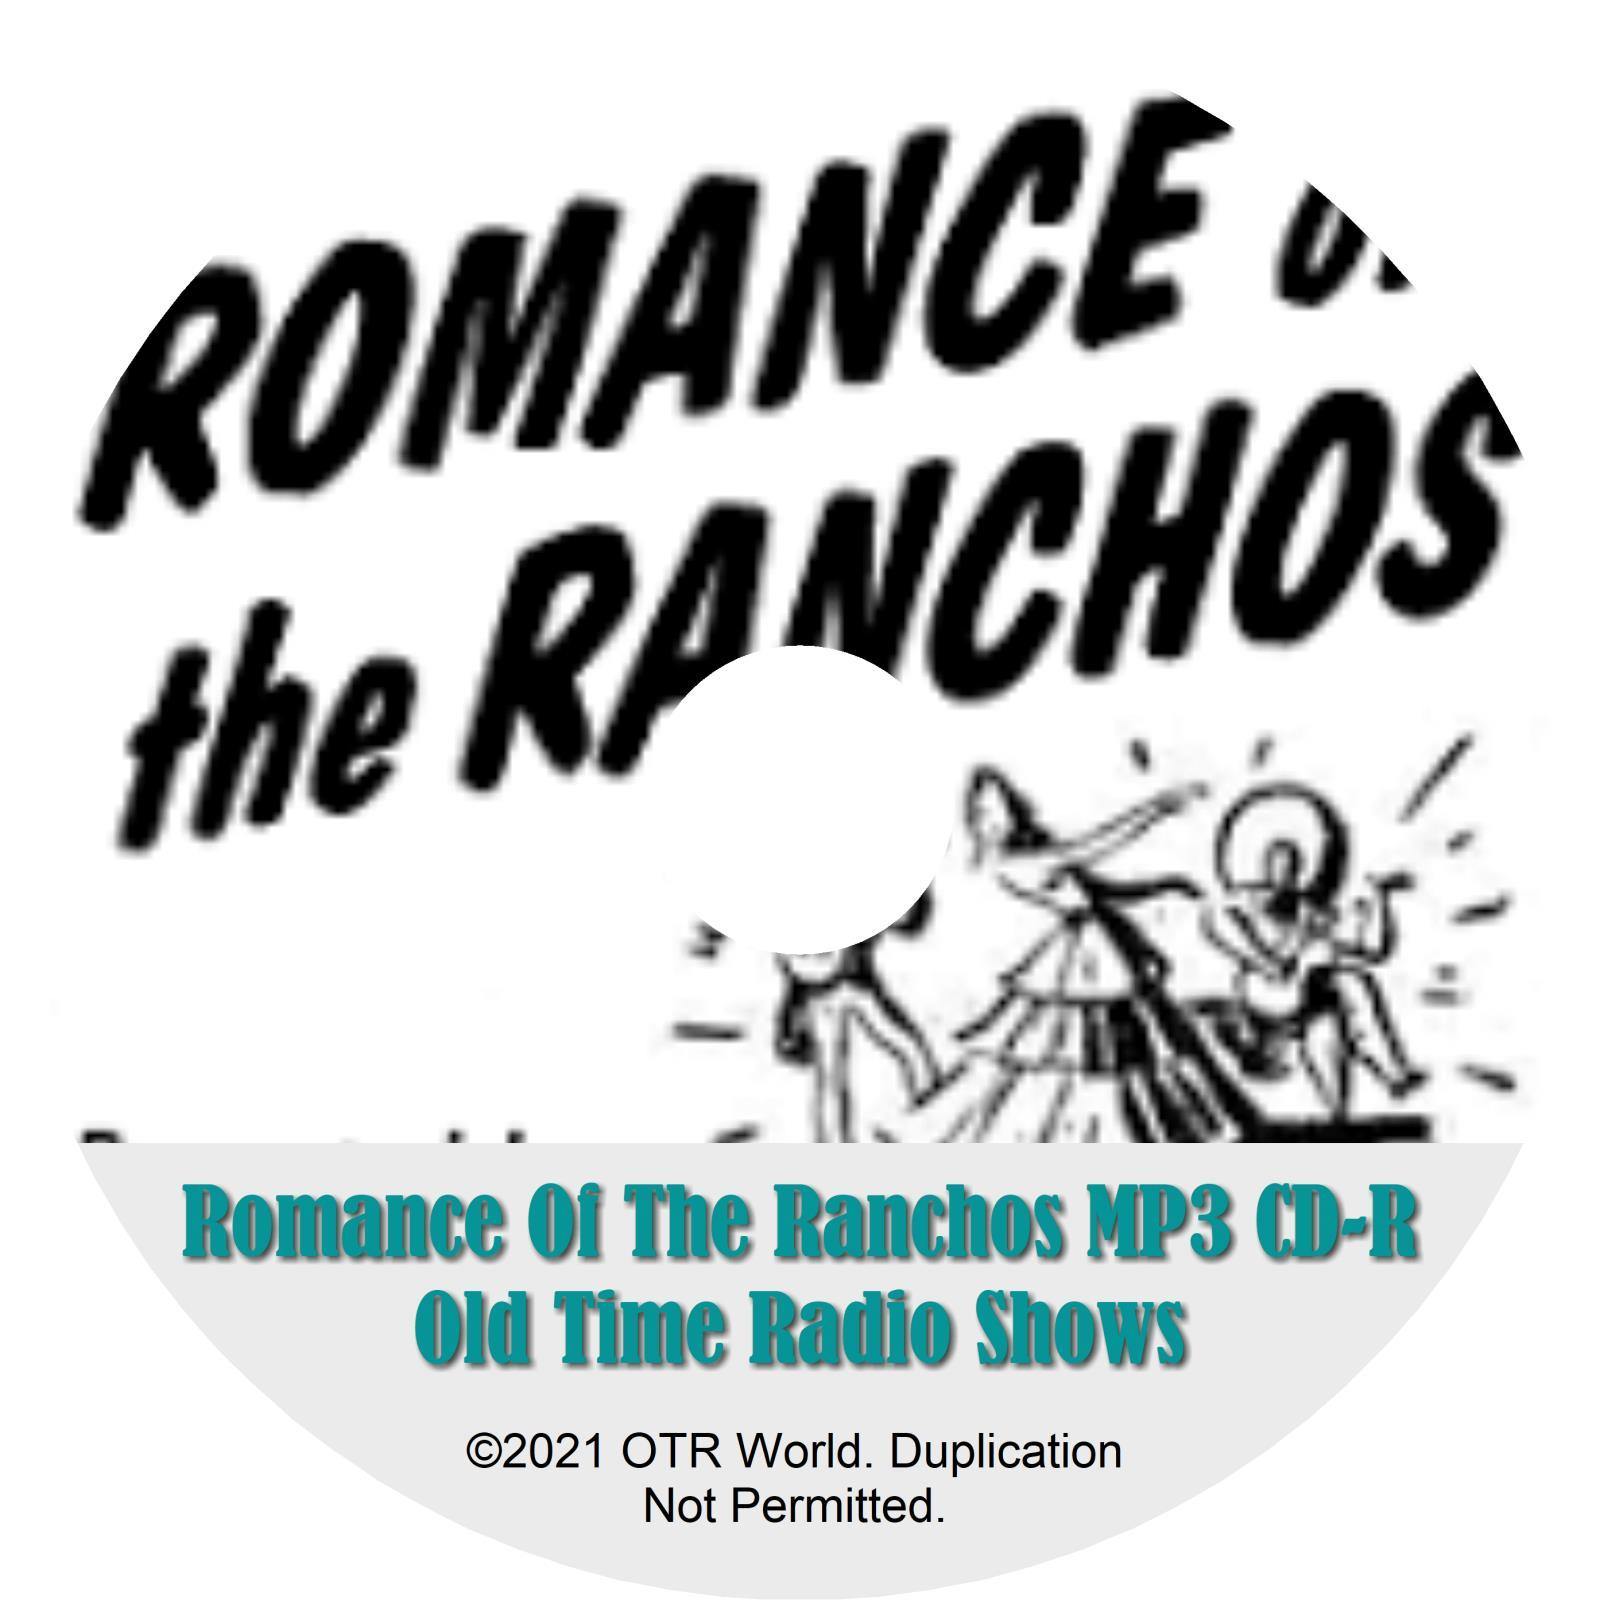 Romance Of The Ranchos OTR OTRS Old Time Radio Shows MP3 On CD-R 35 Episode